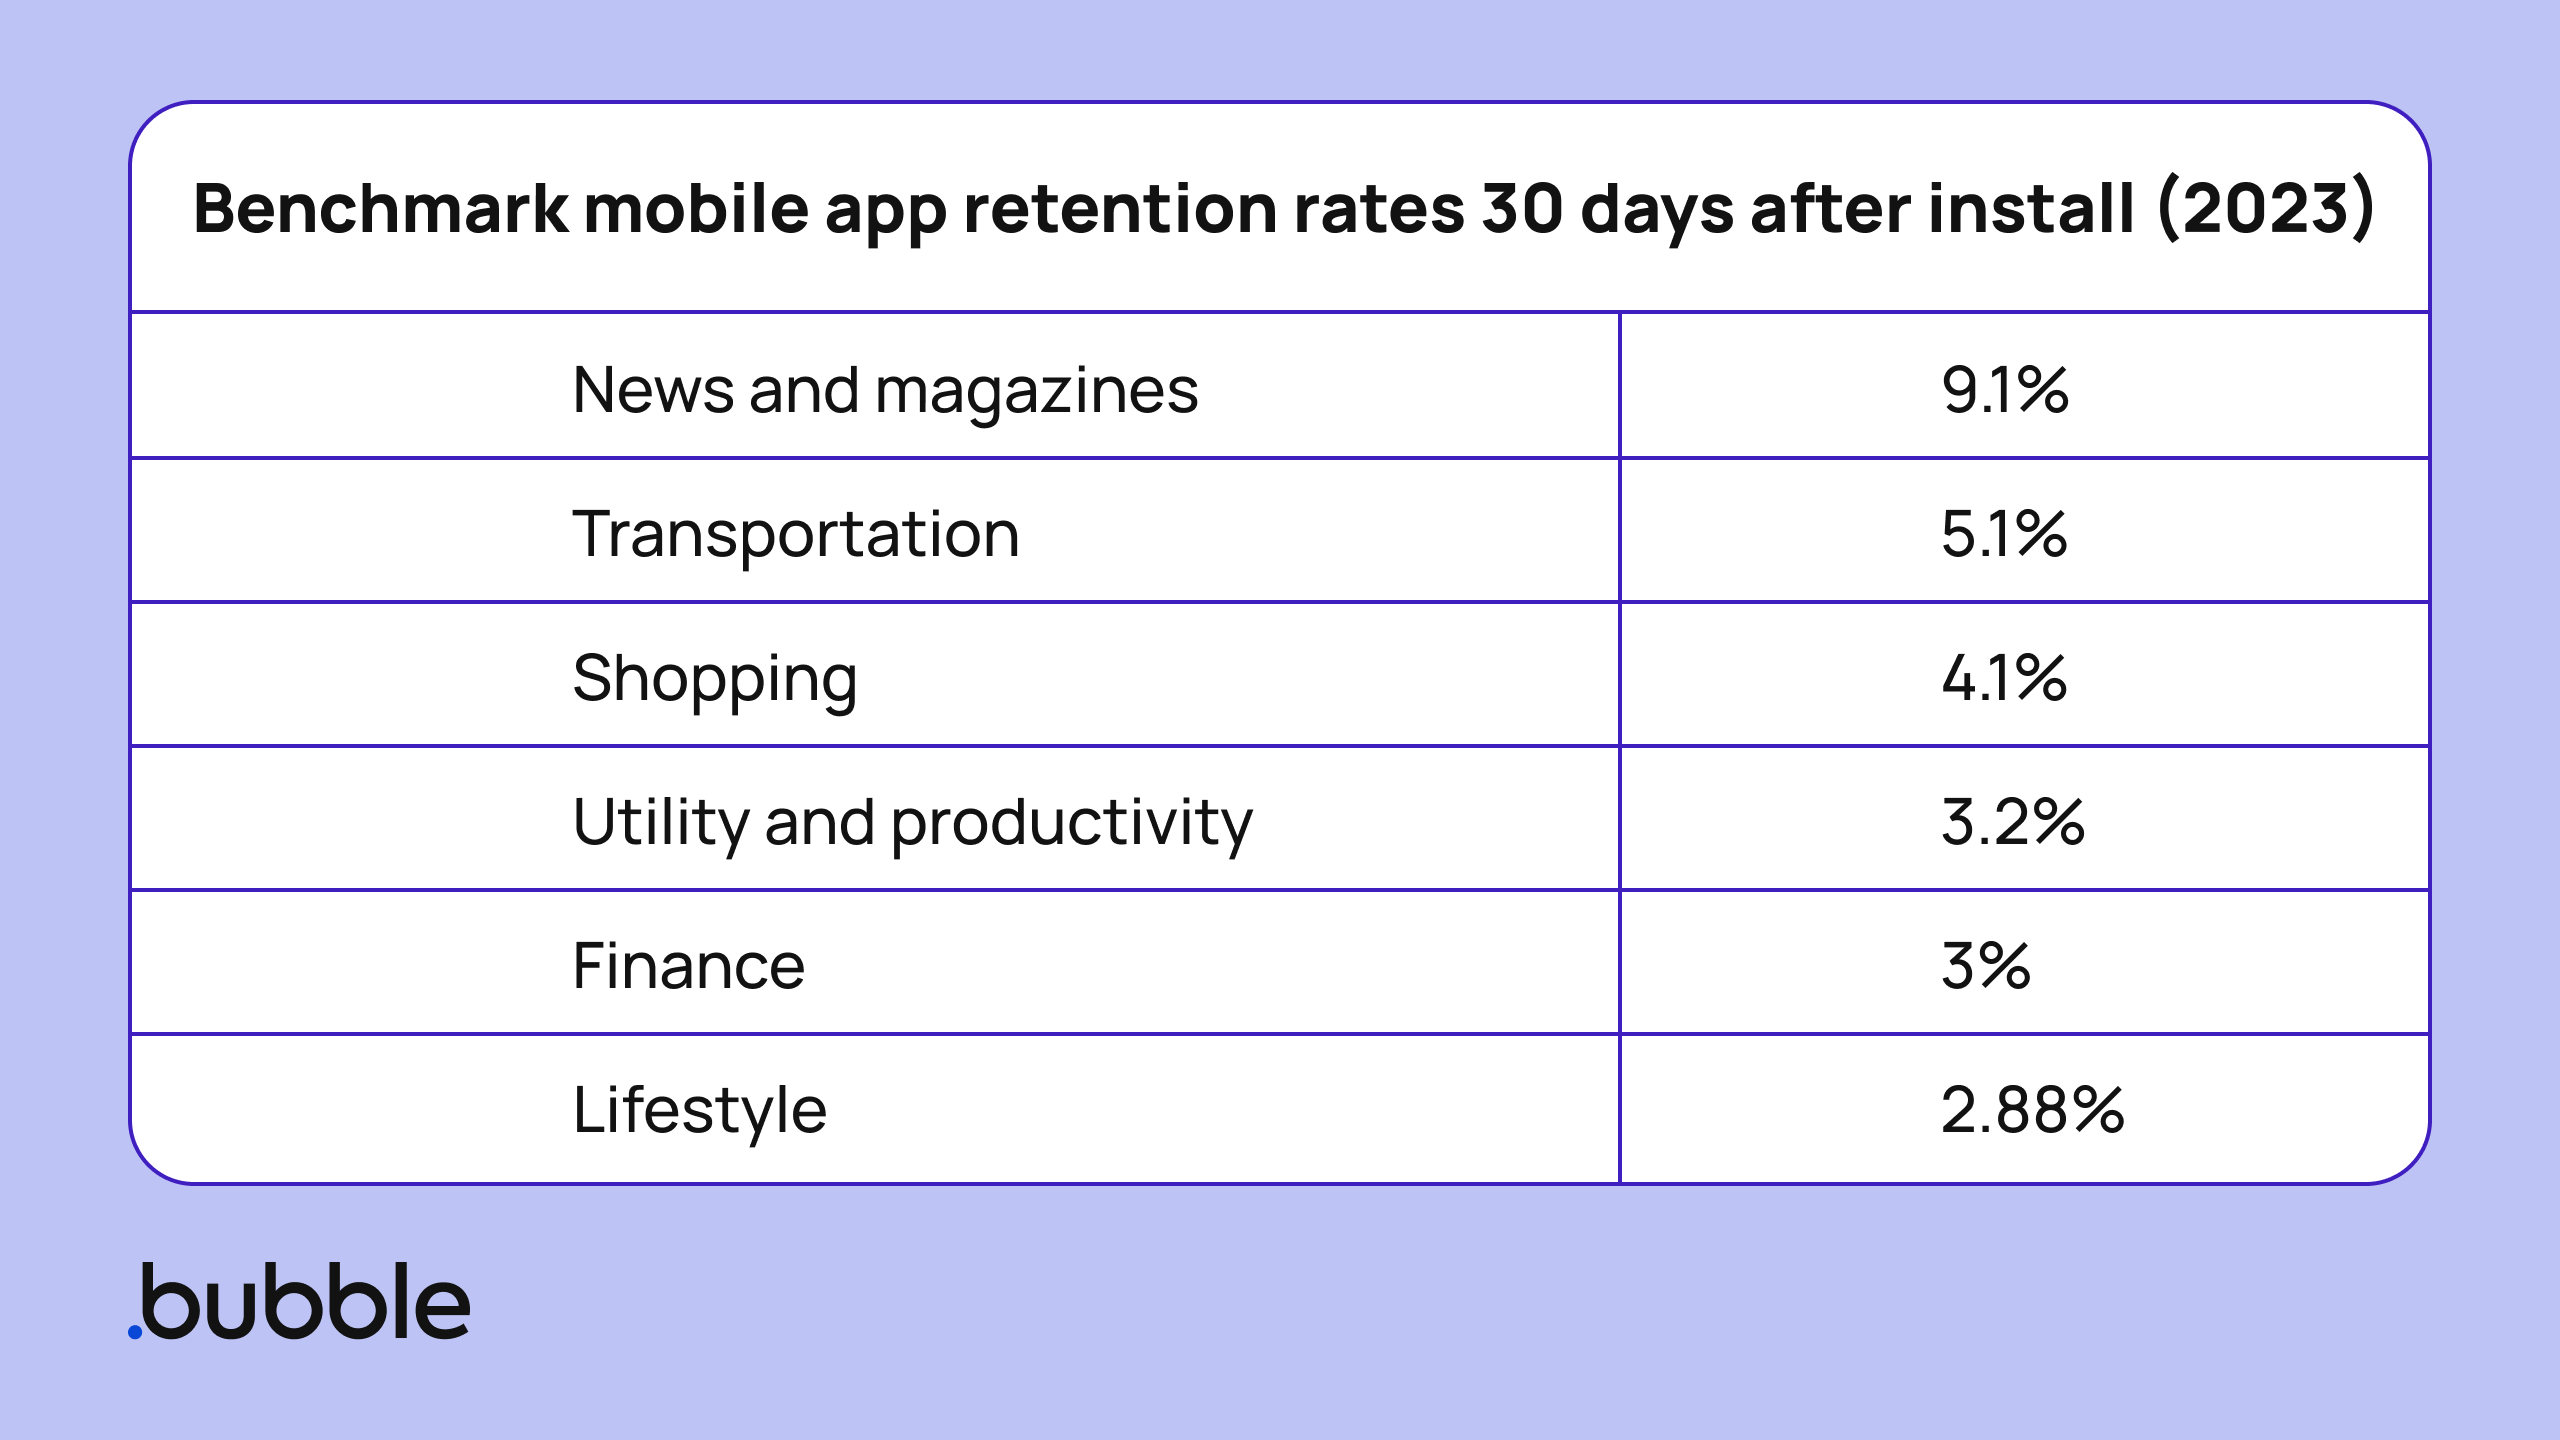 A chart showing benchmarks for mobile app retention 30 days after installation, grouped by category..